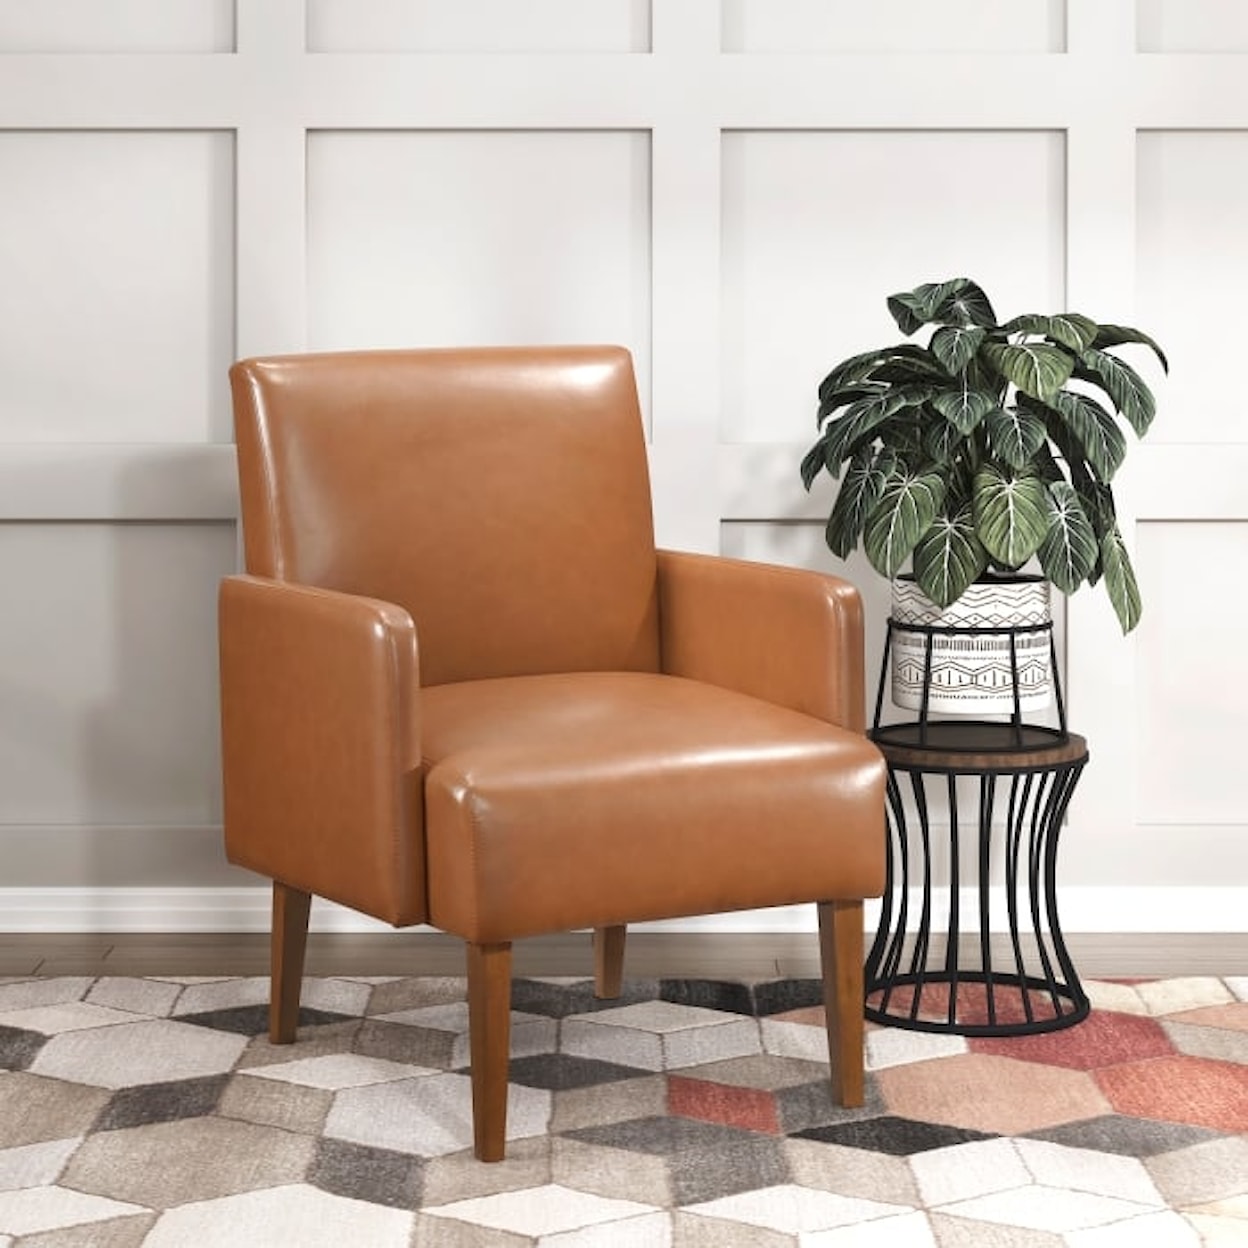 Homelegance Miscellaneous Accent Chair